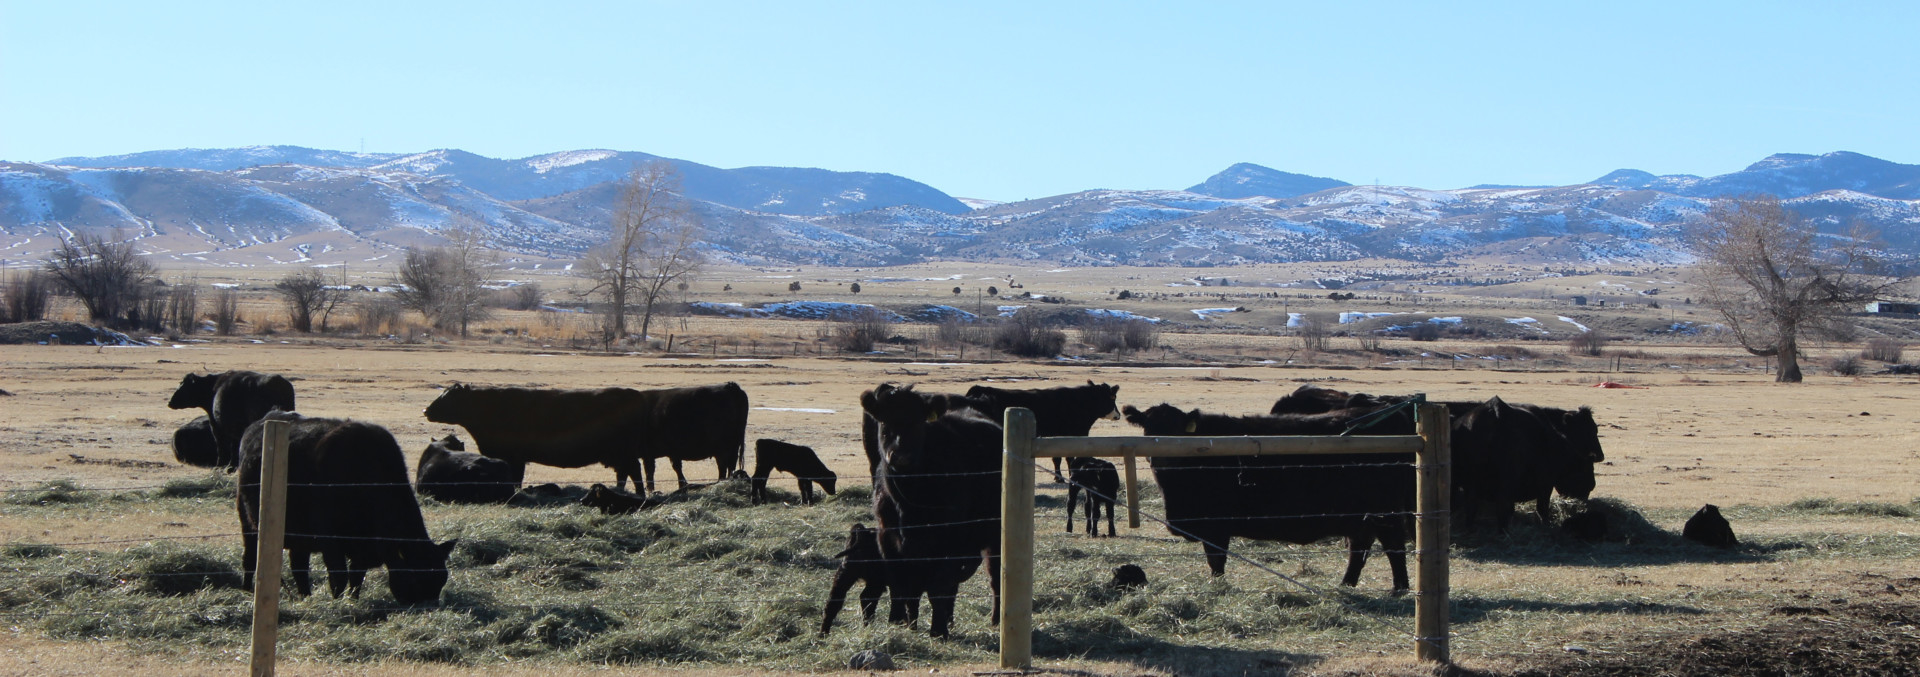 Montana Ranch For Sale Crow Creek Cattle Ranch